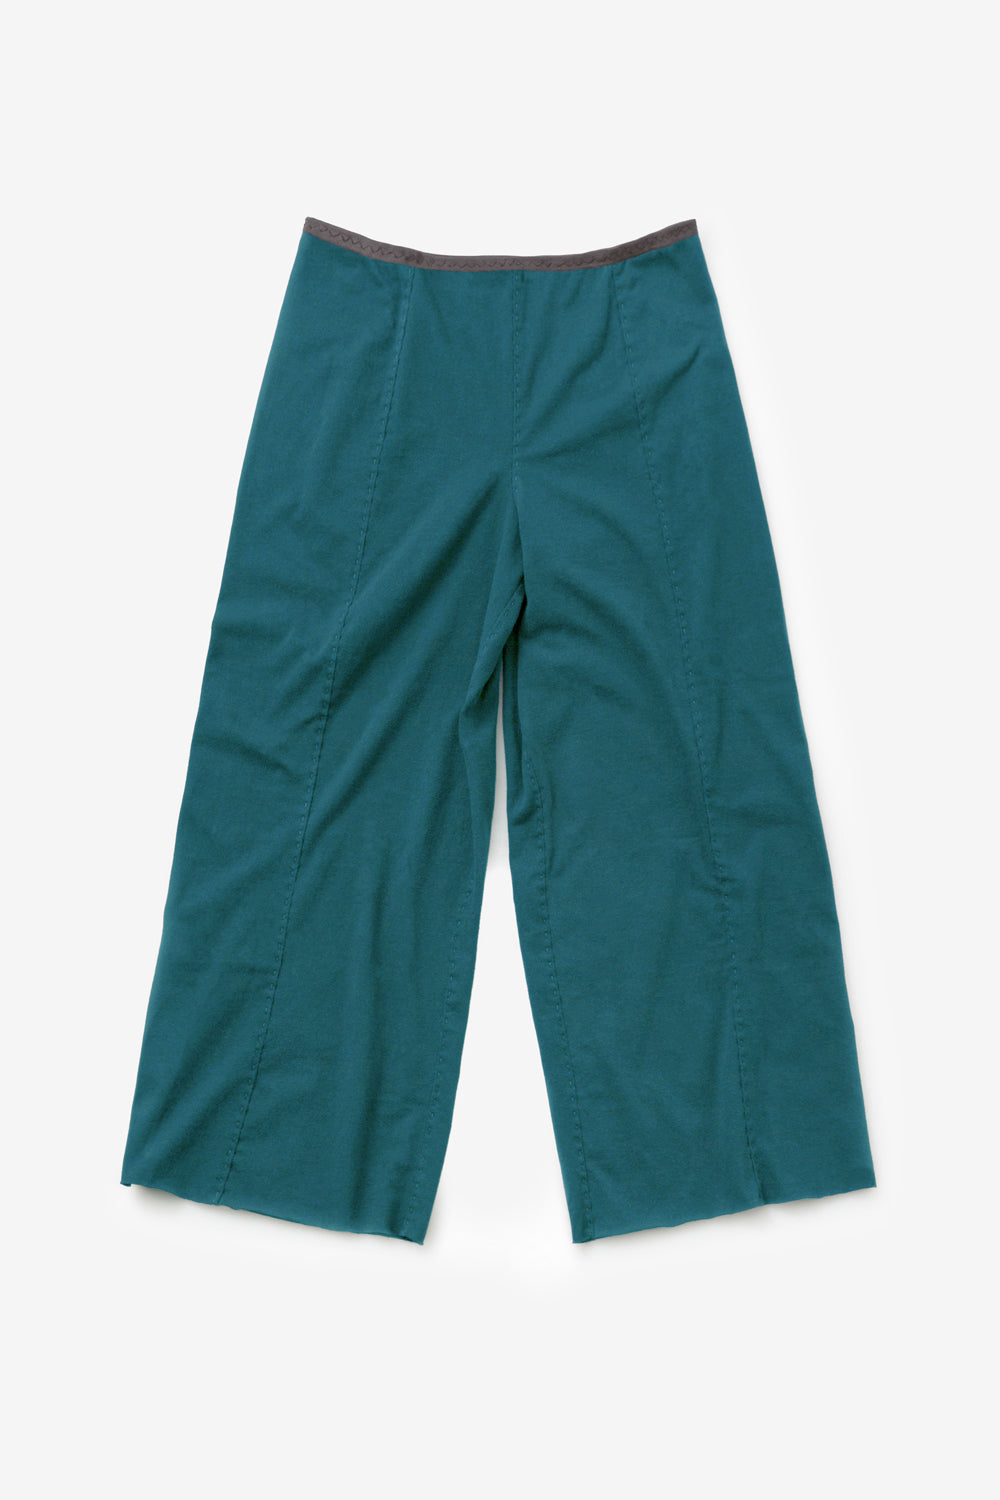 The School of Making Crop Pant in teal made of 100% organic cotton.